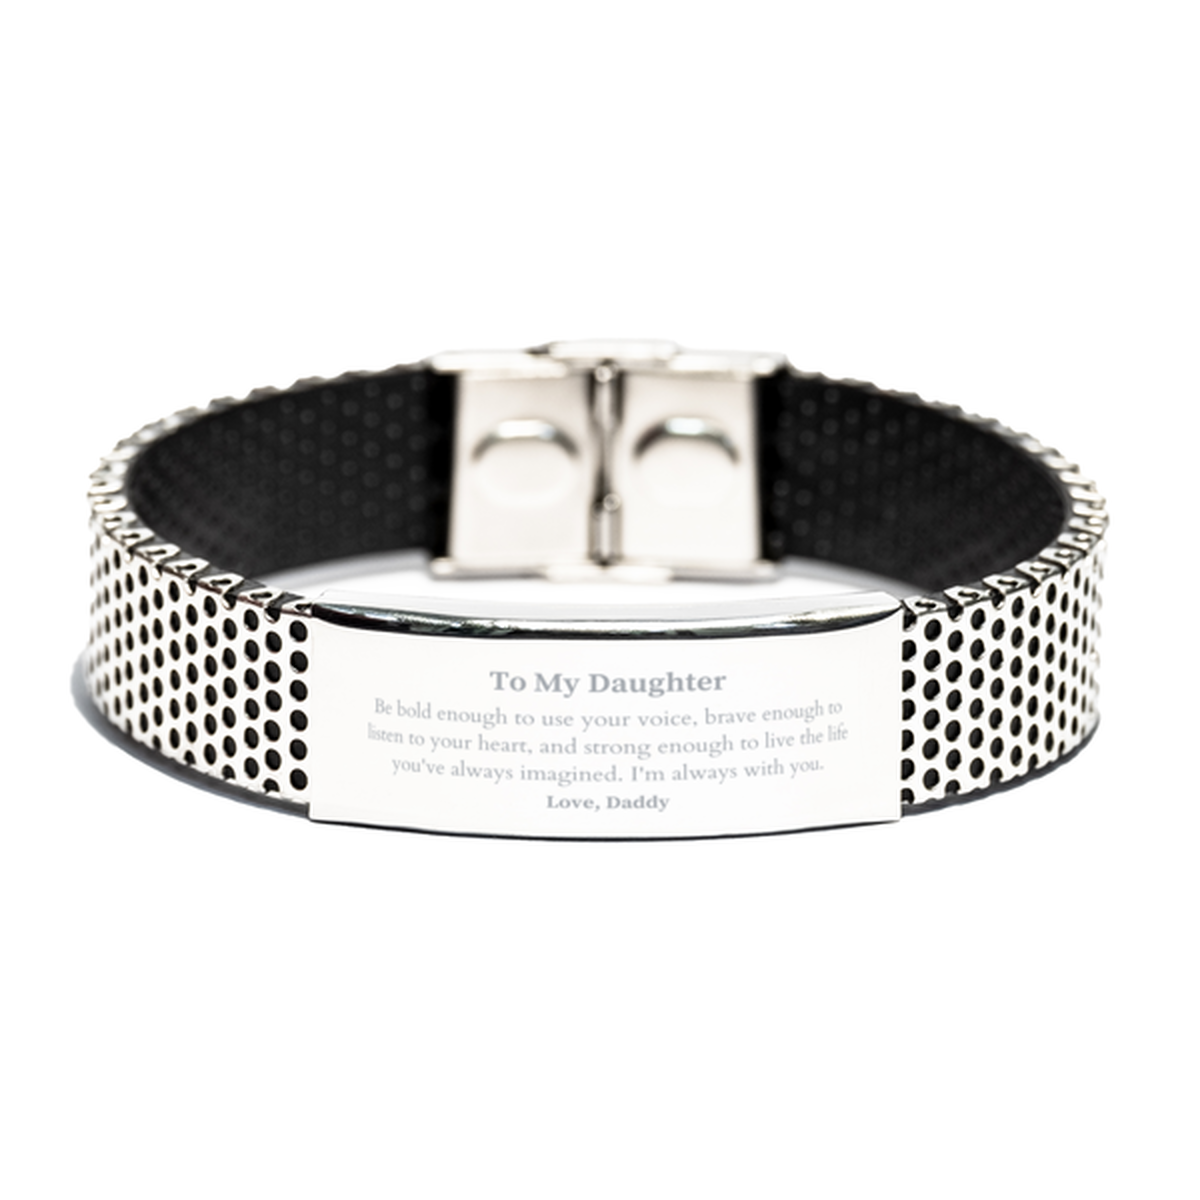 Keepsake Daughter Stainless Steel Bracelet Gift Idea Graduation Christmas Birthday Daughter from Daddy, Daughter Be bold enough to use your voice, brave enough to listen to your heart. Love, Daddy